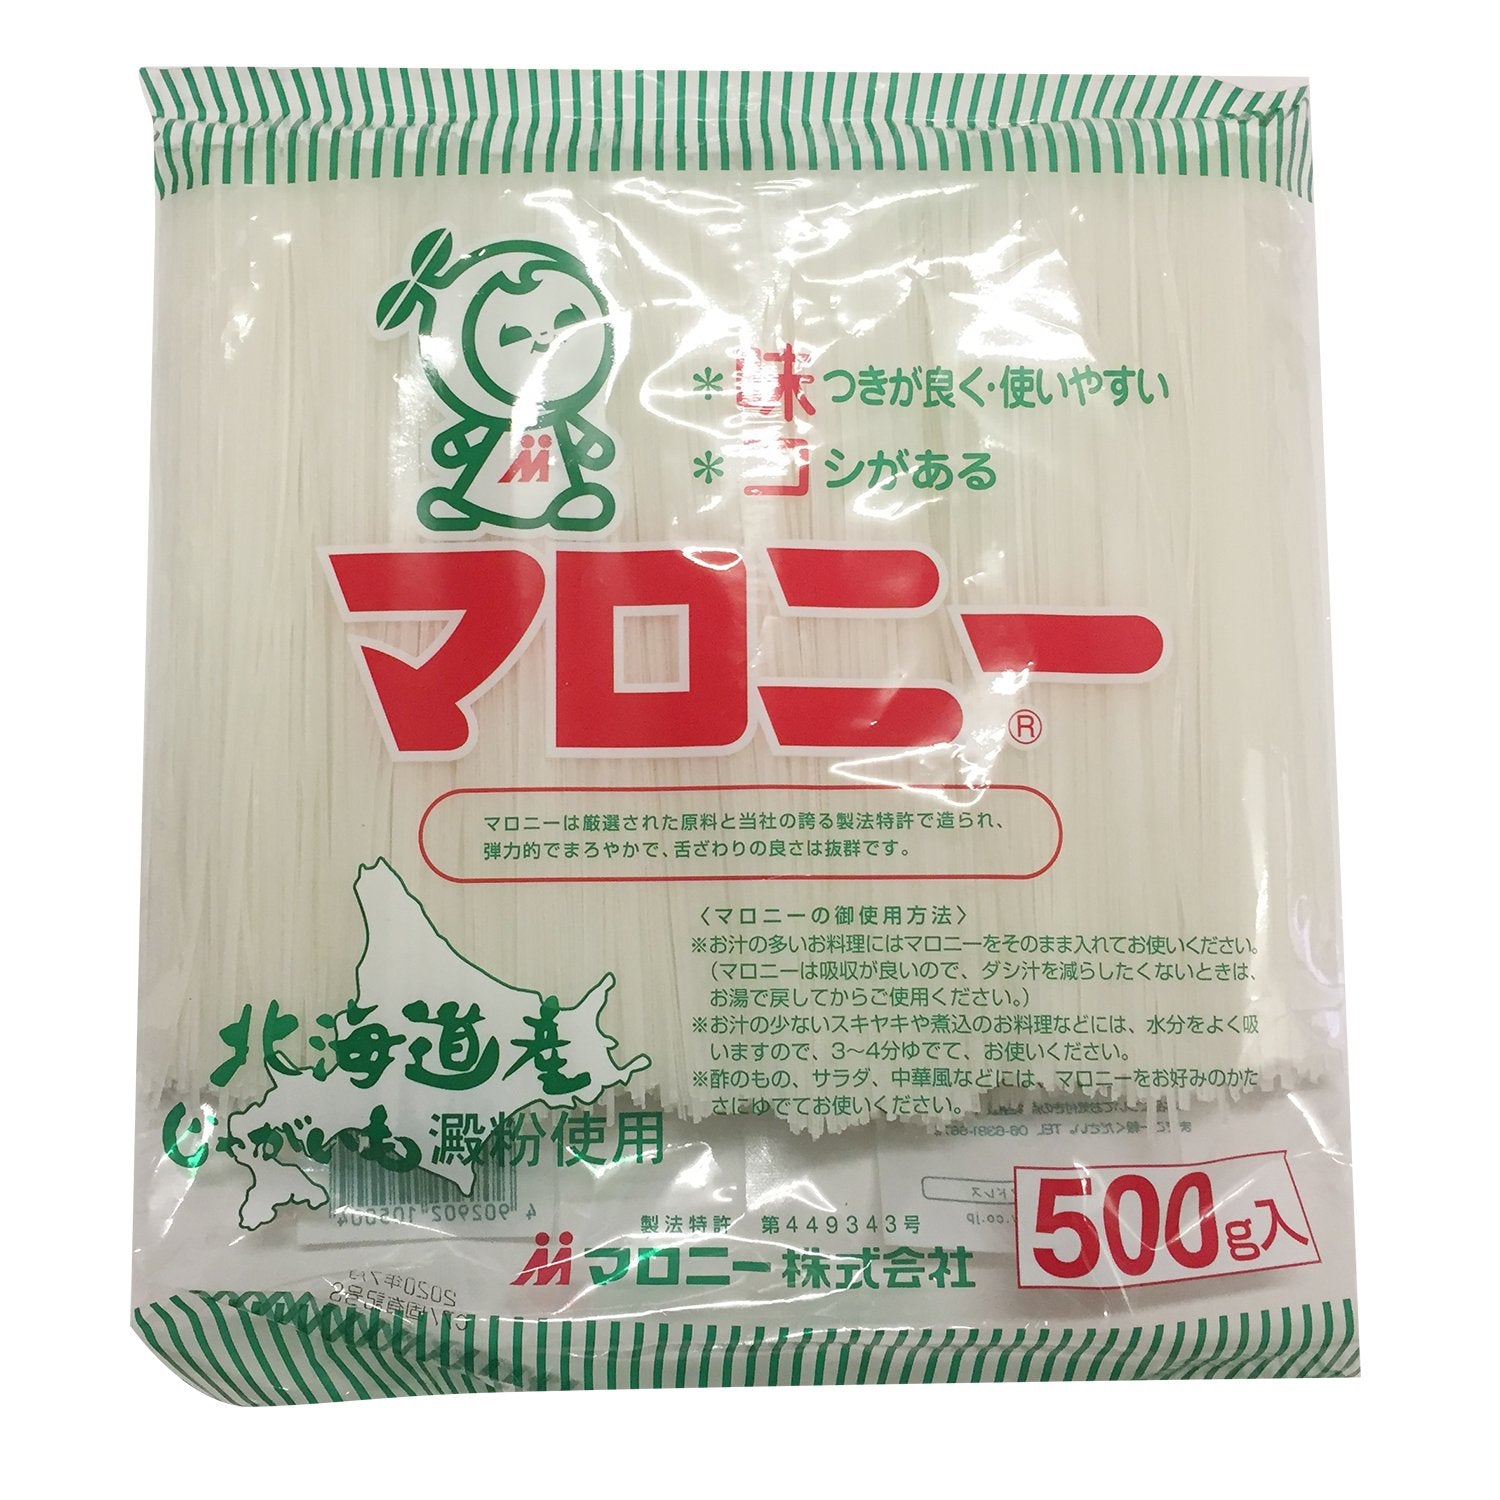 MALONY HARUSAME NOODLES 500g